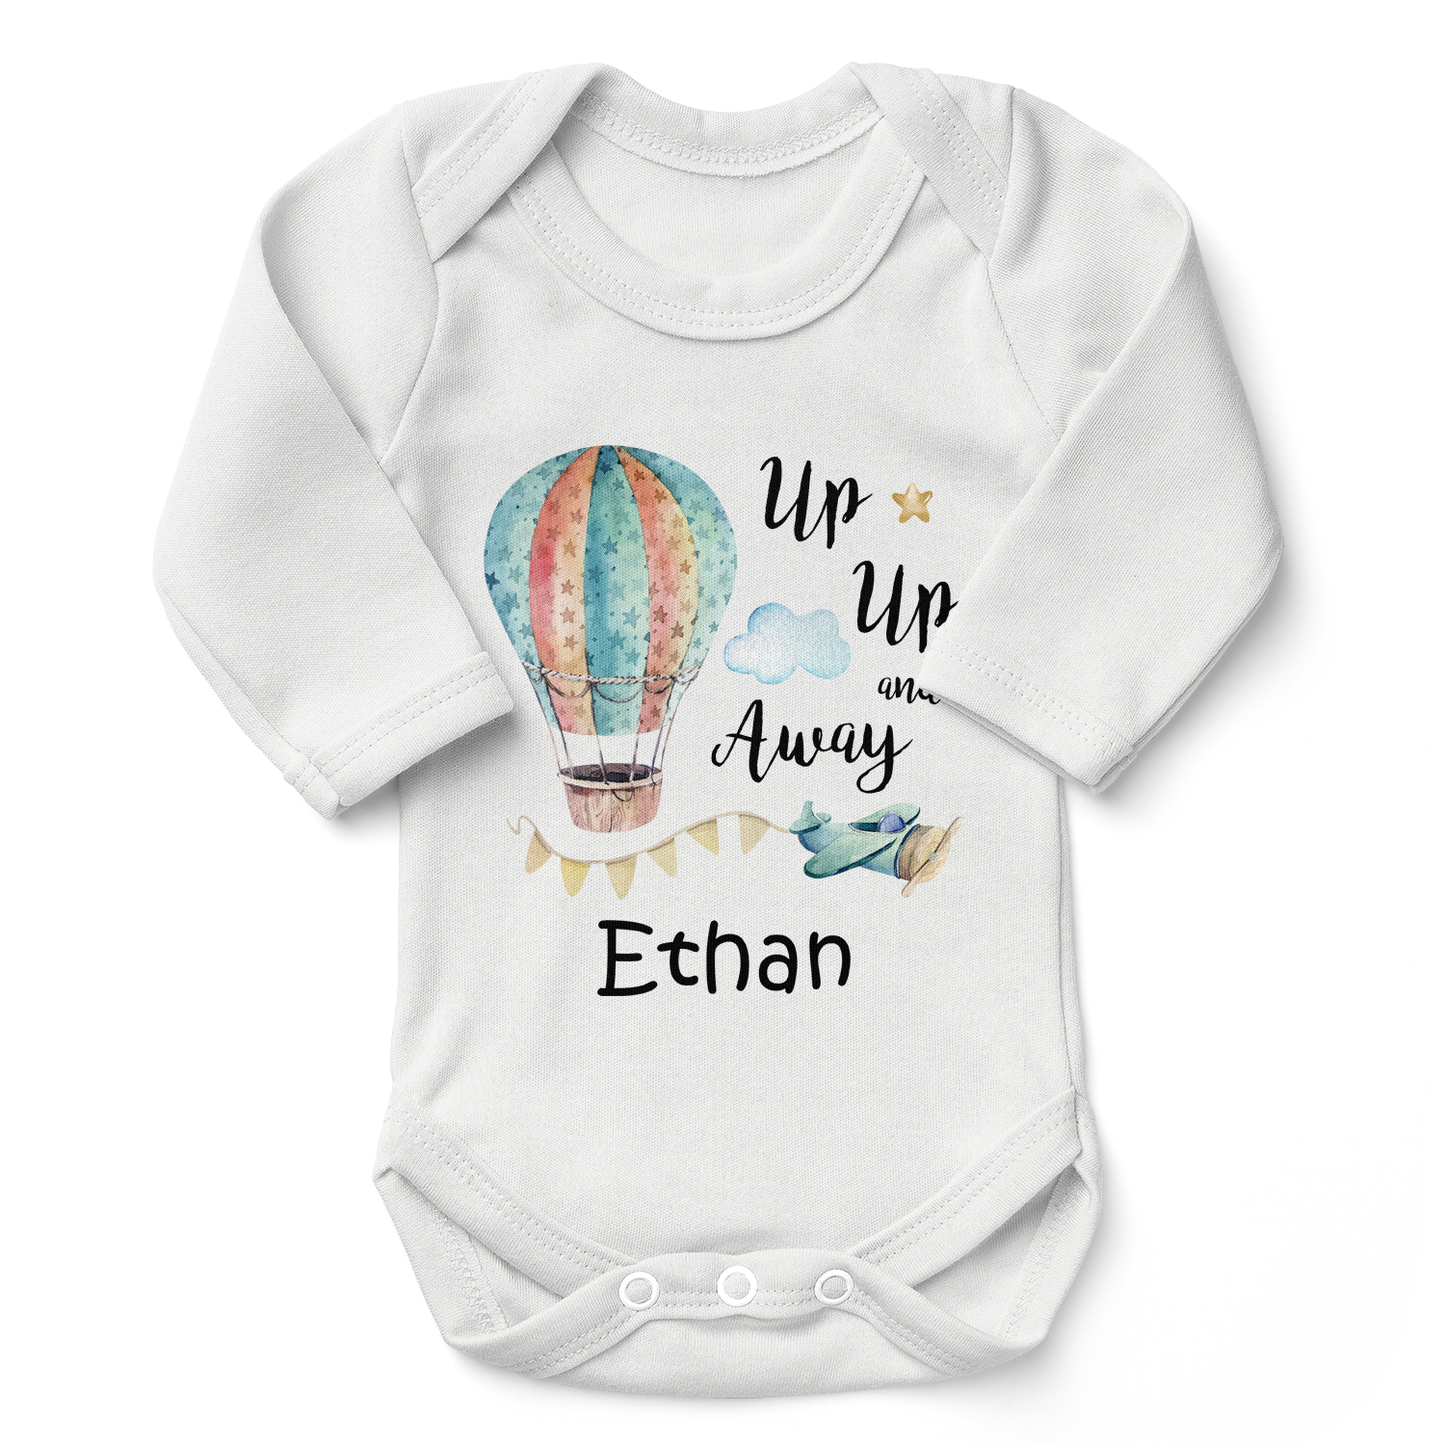 [Personalized] Endanzoo Organic Baby Bodysuit - Up, Up, and Away